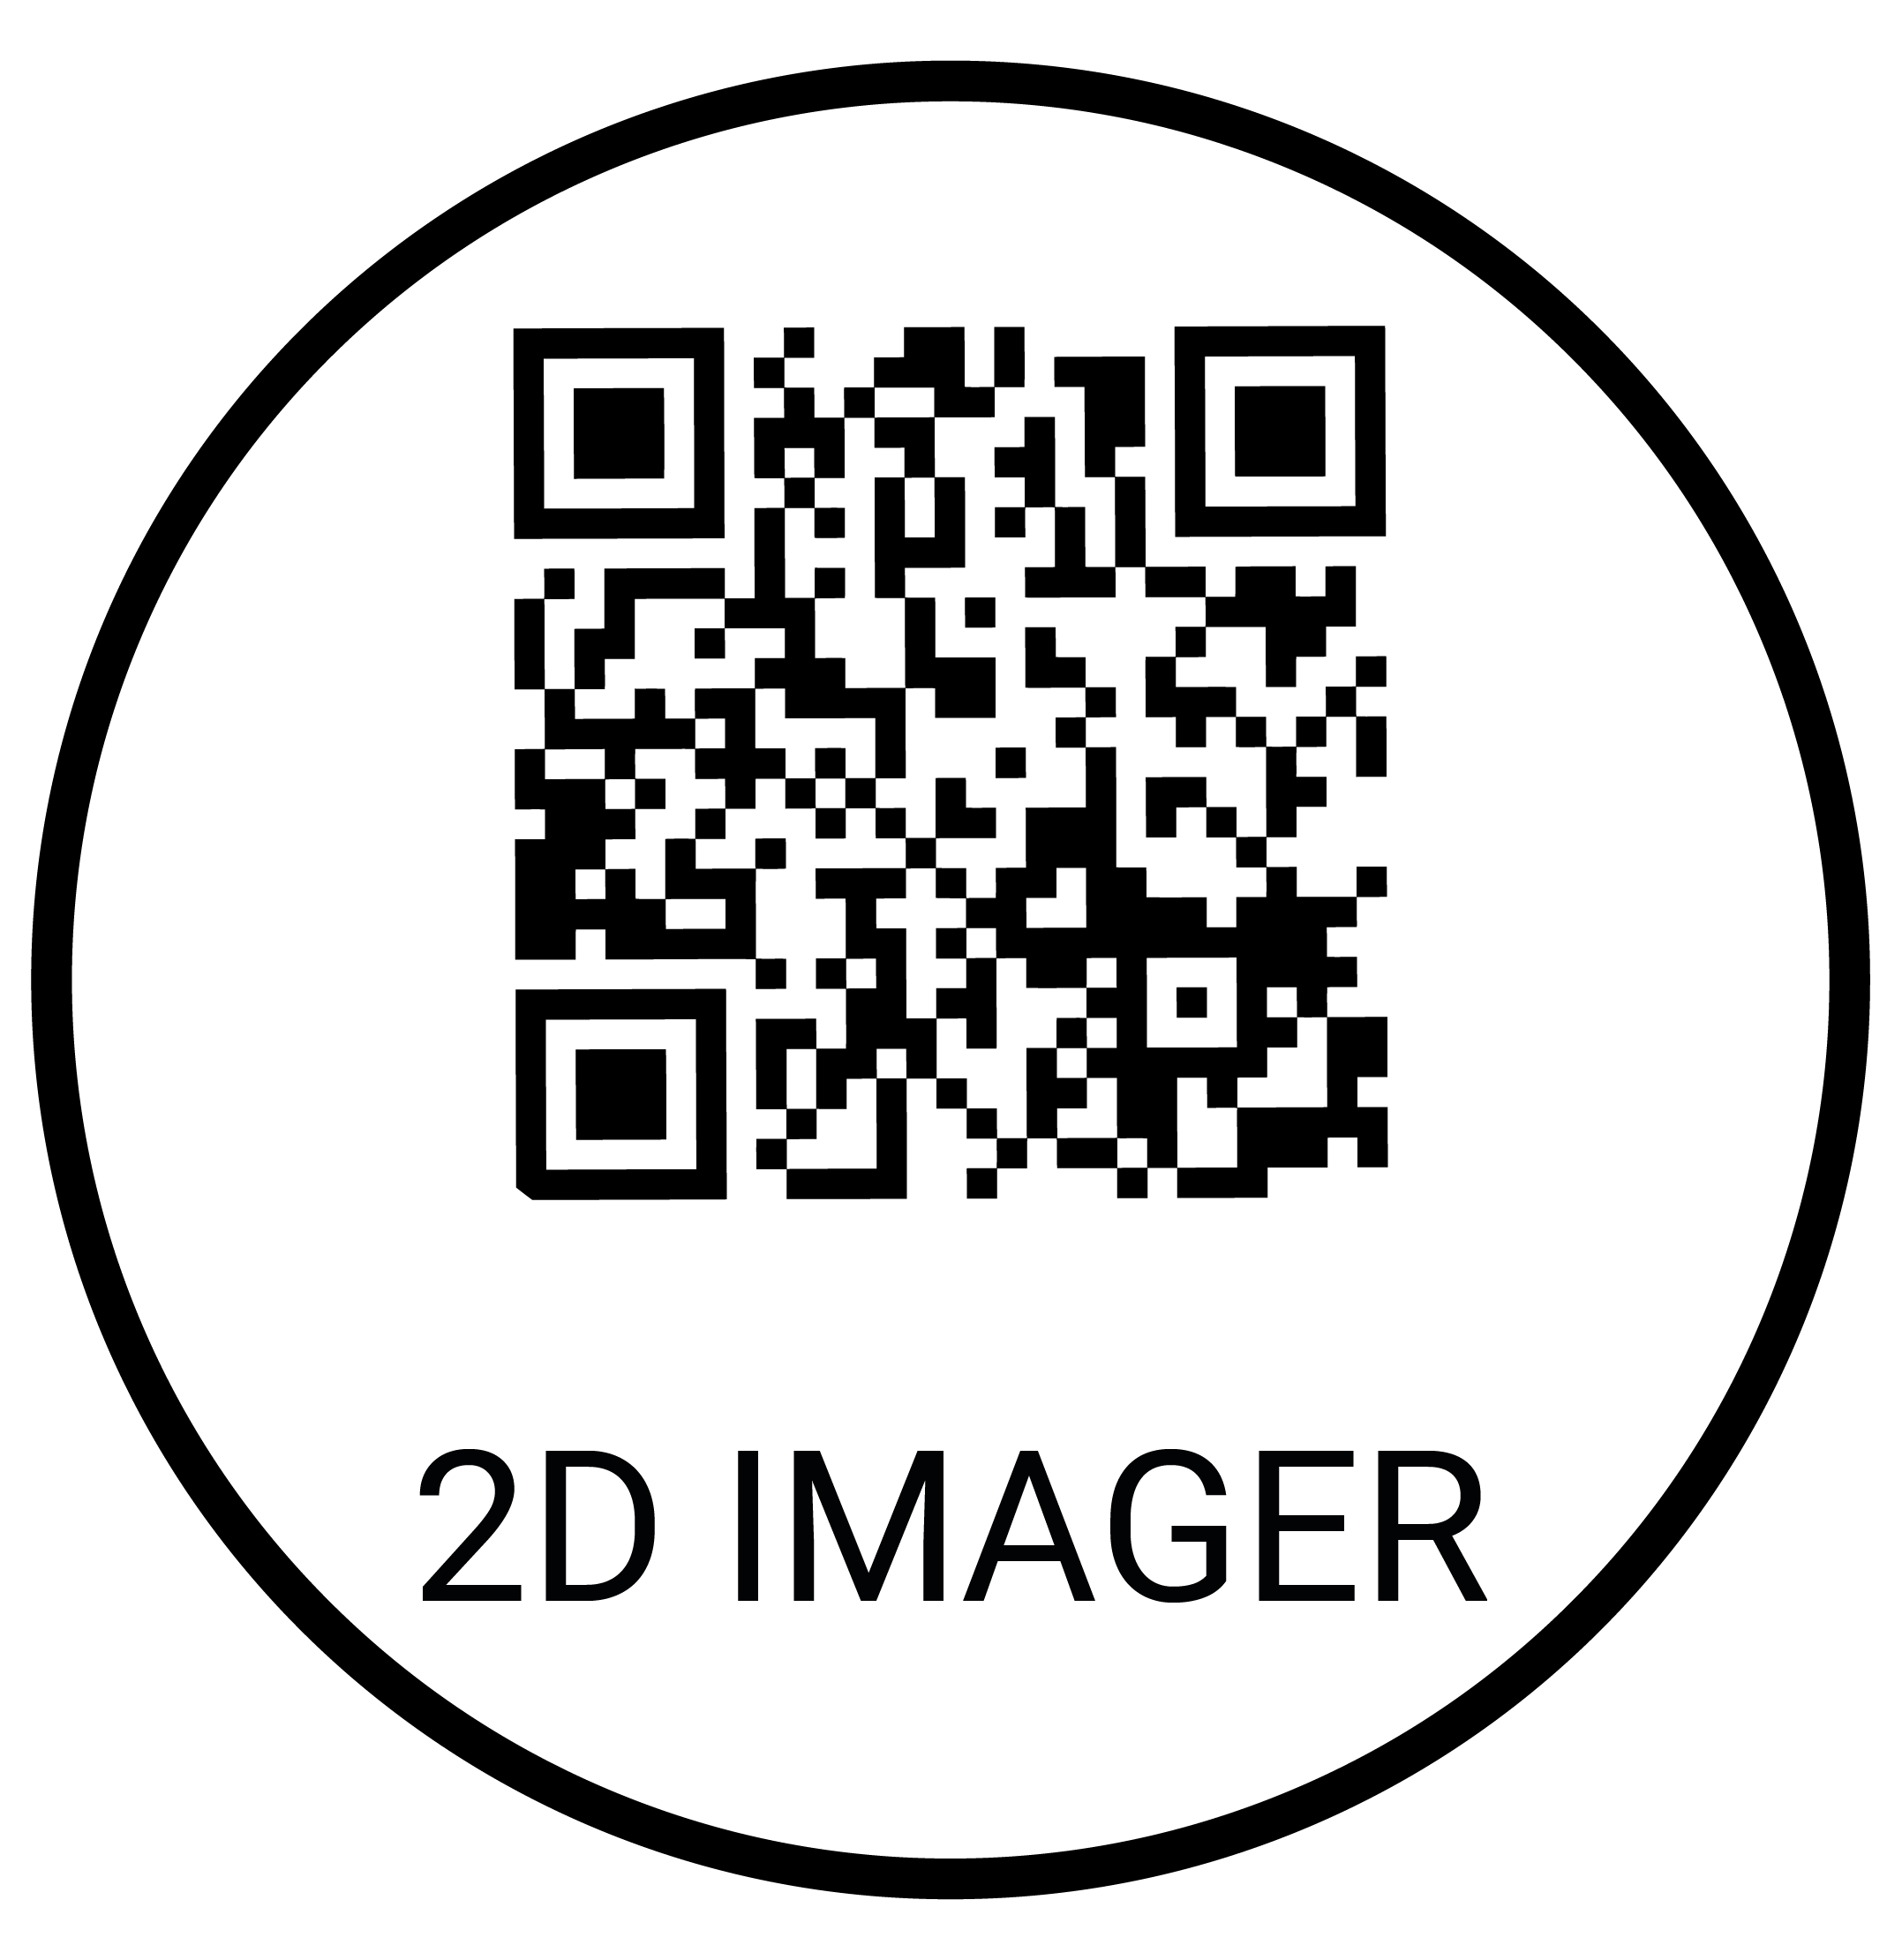 PM84 2D Imager